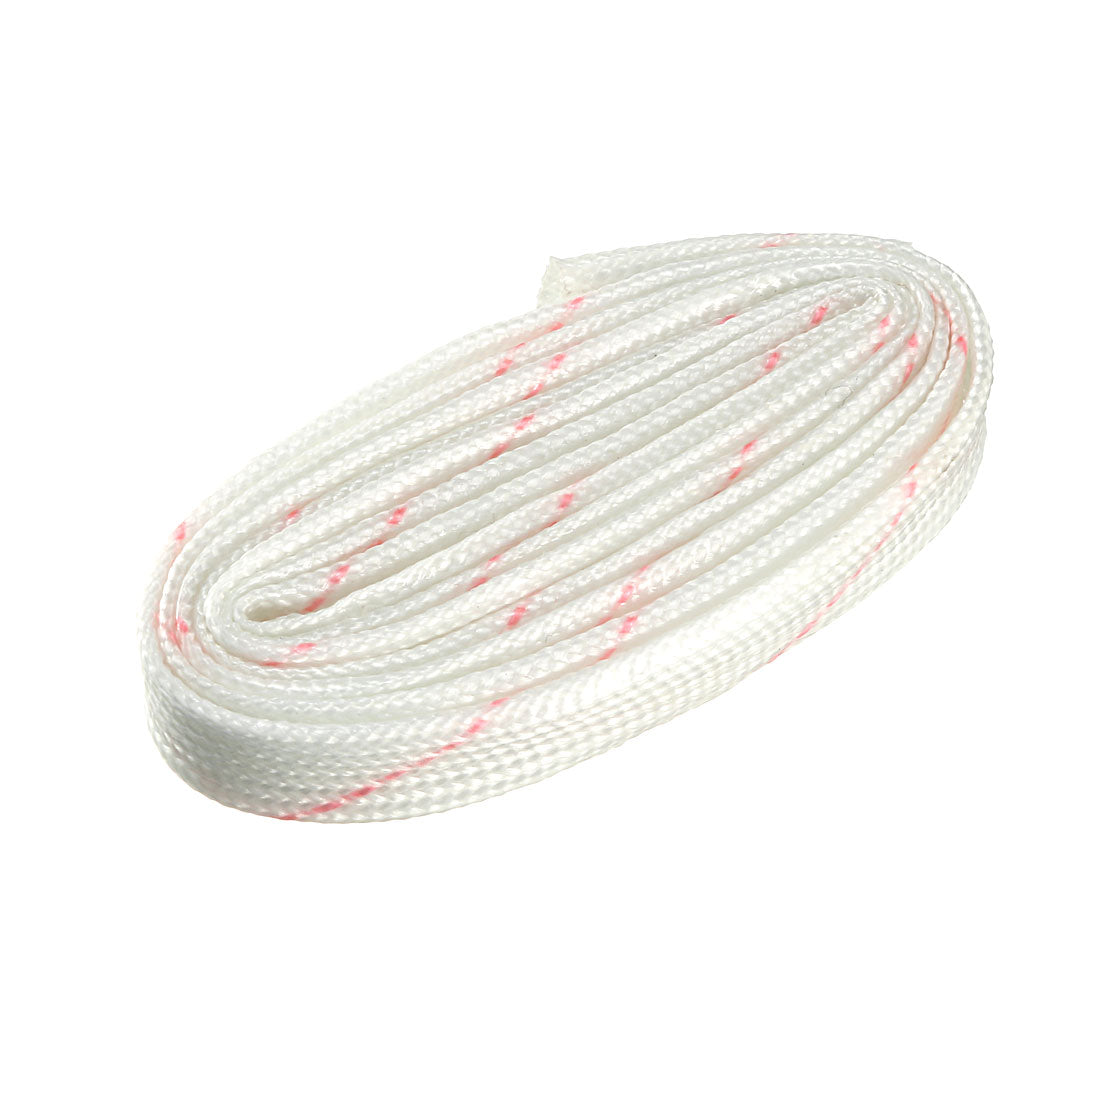 uxcell Uxcell Fiberglass Sleeve 8mm I.D. PVC Insulation Tubing 1500V Tube Adjustable Sleeving Pipe 125 Degree Centigrade Cable Wrap Wire 880mm 3.28ft White and Red